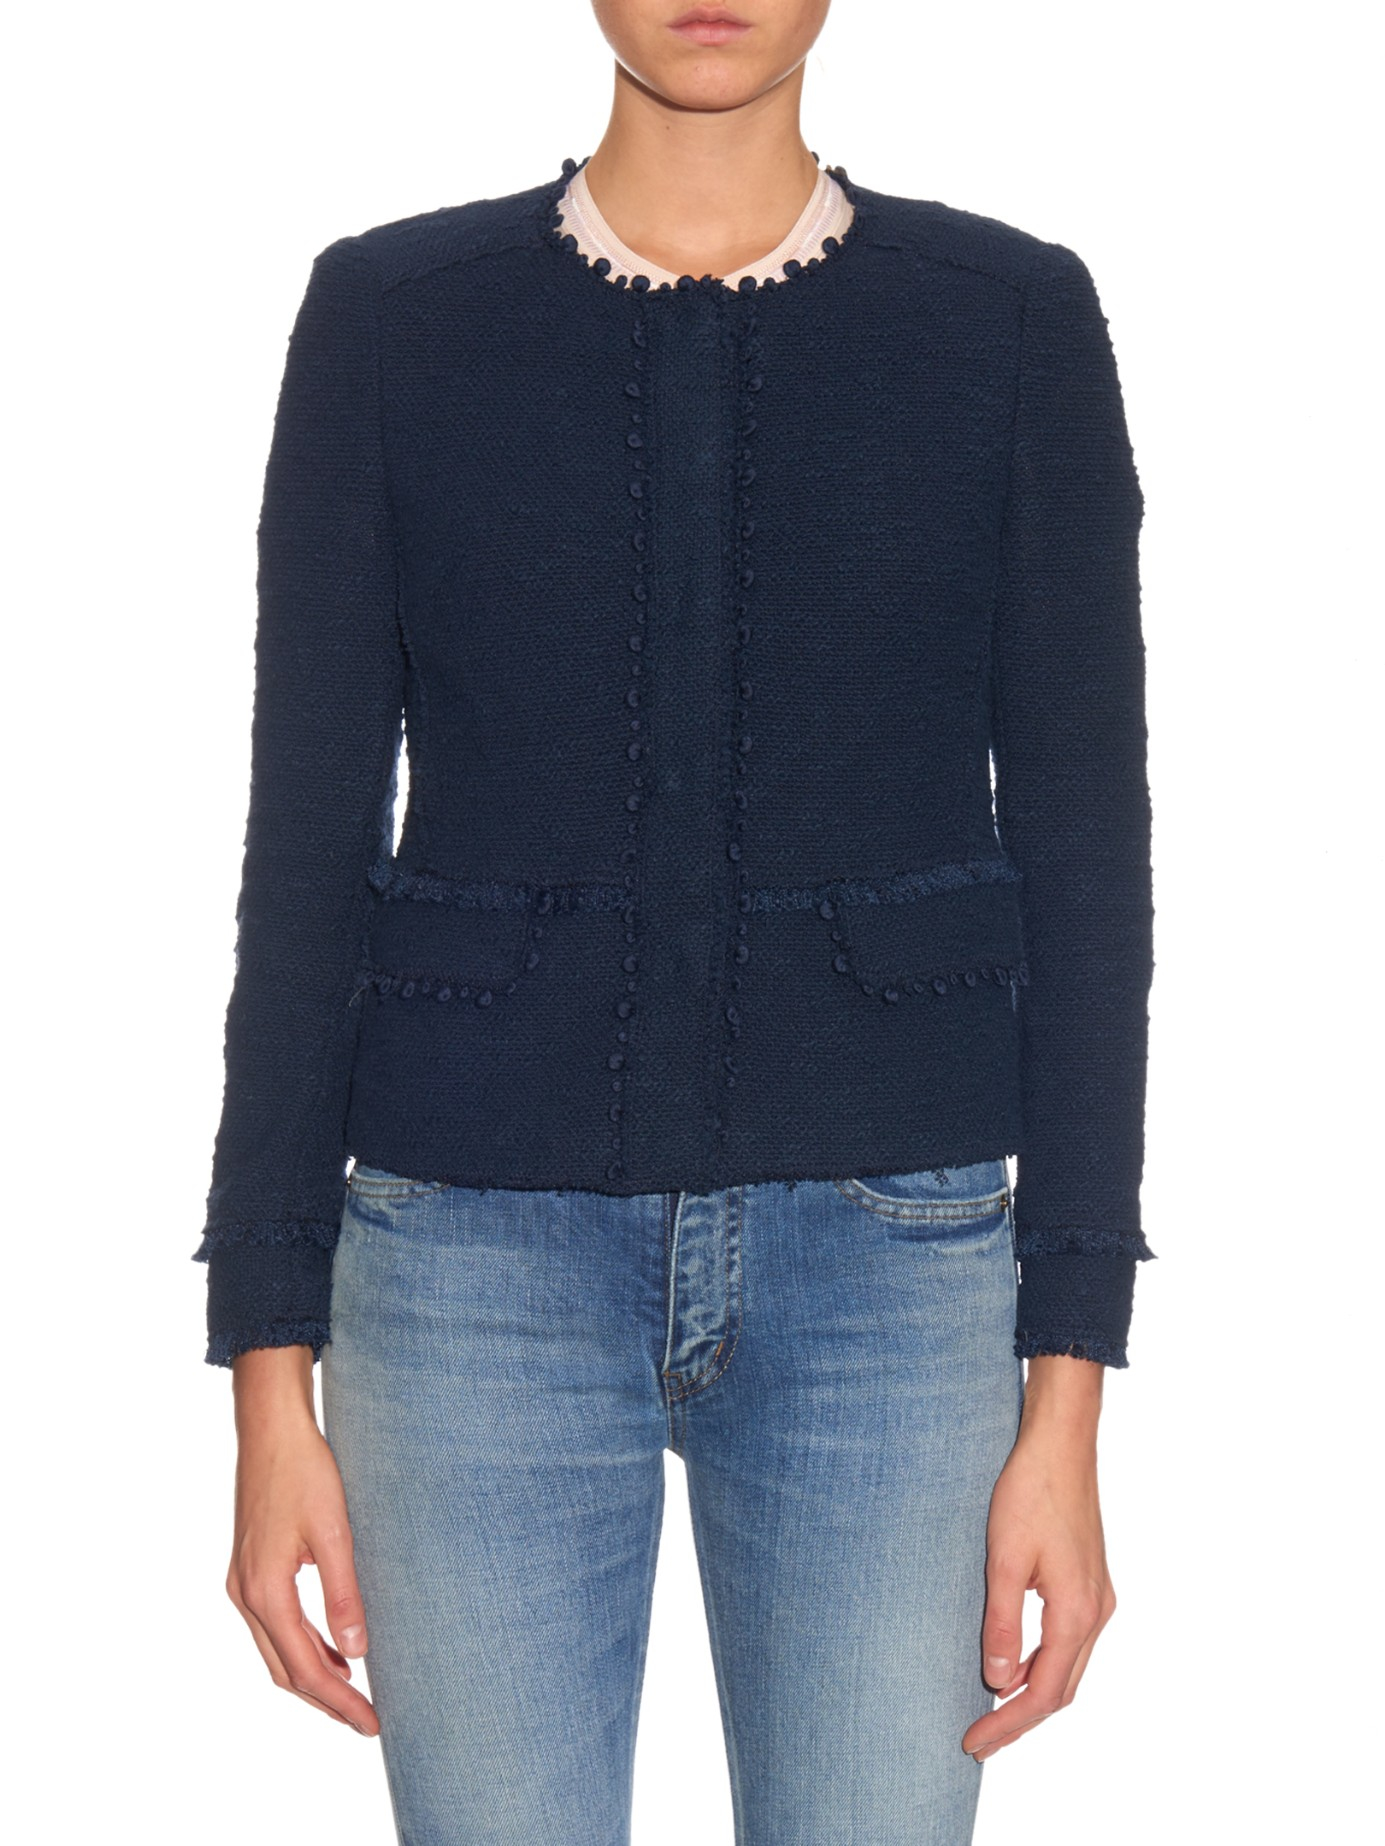 Lyst - Rebecca Taylor Collarless Stretch-bouclé Jacket in Blue